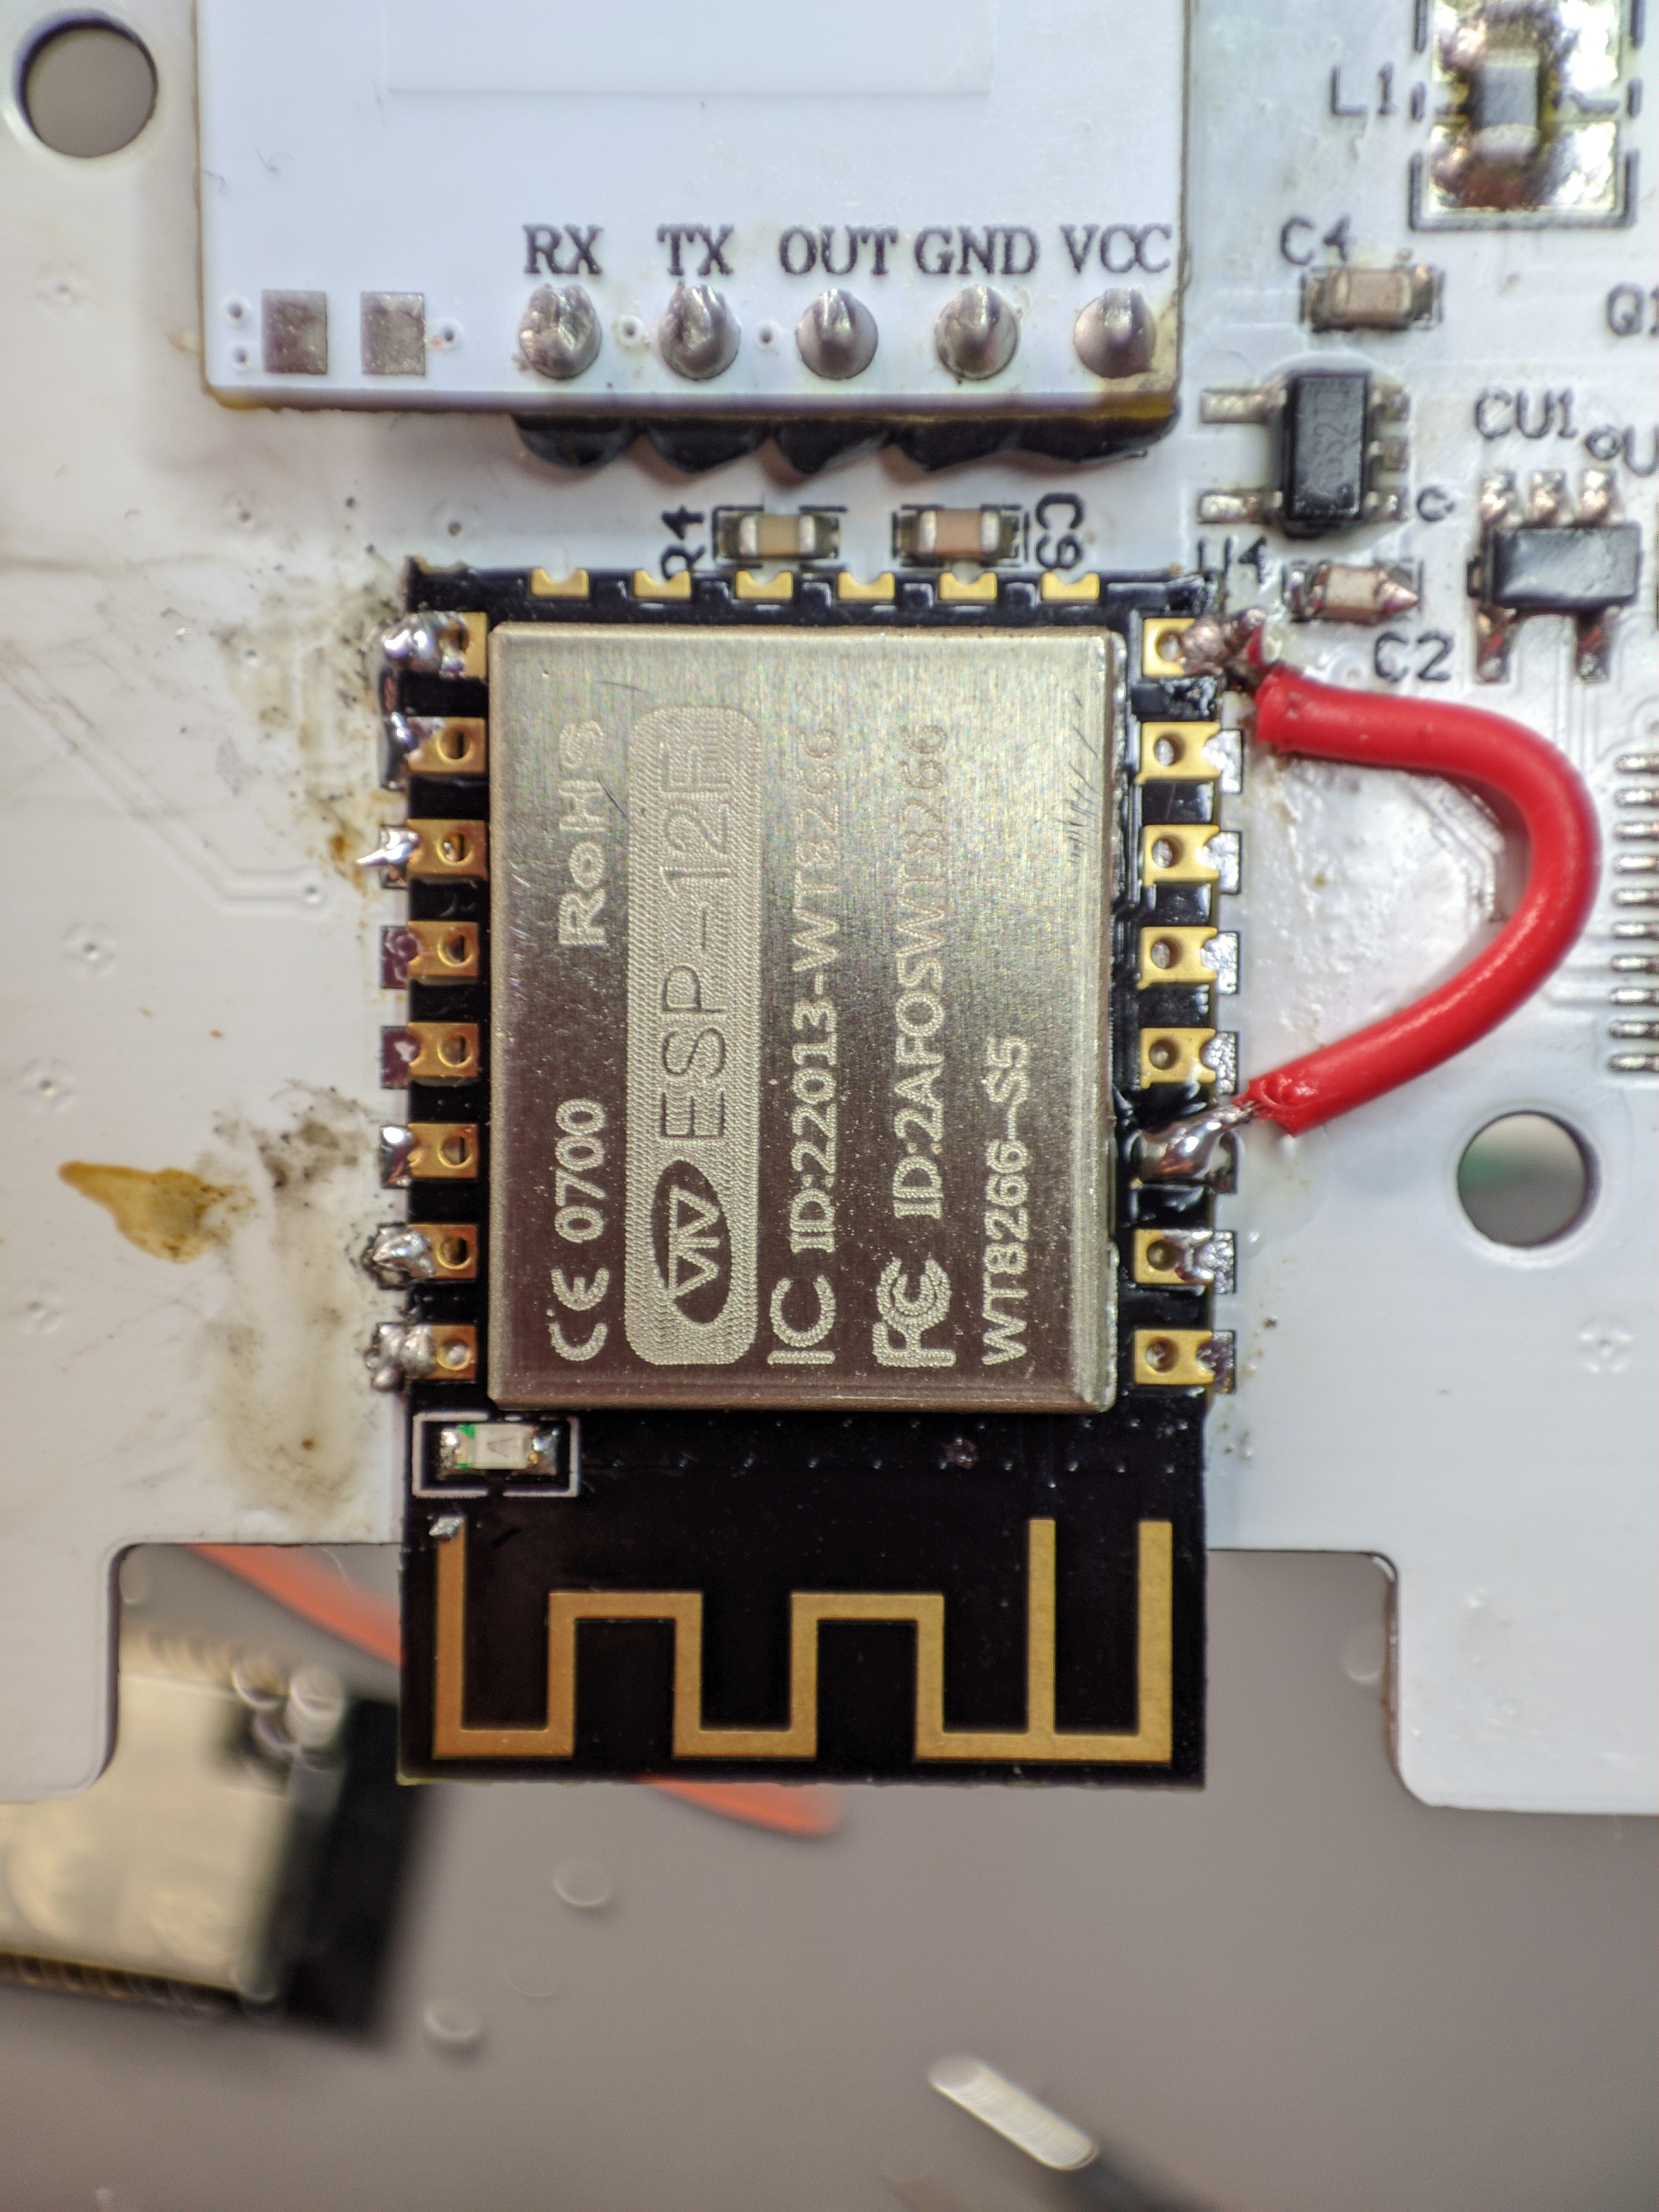 Solder in a compatible preflashed ESP-12 module